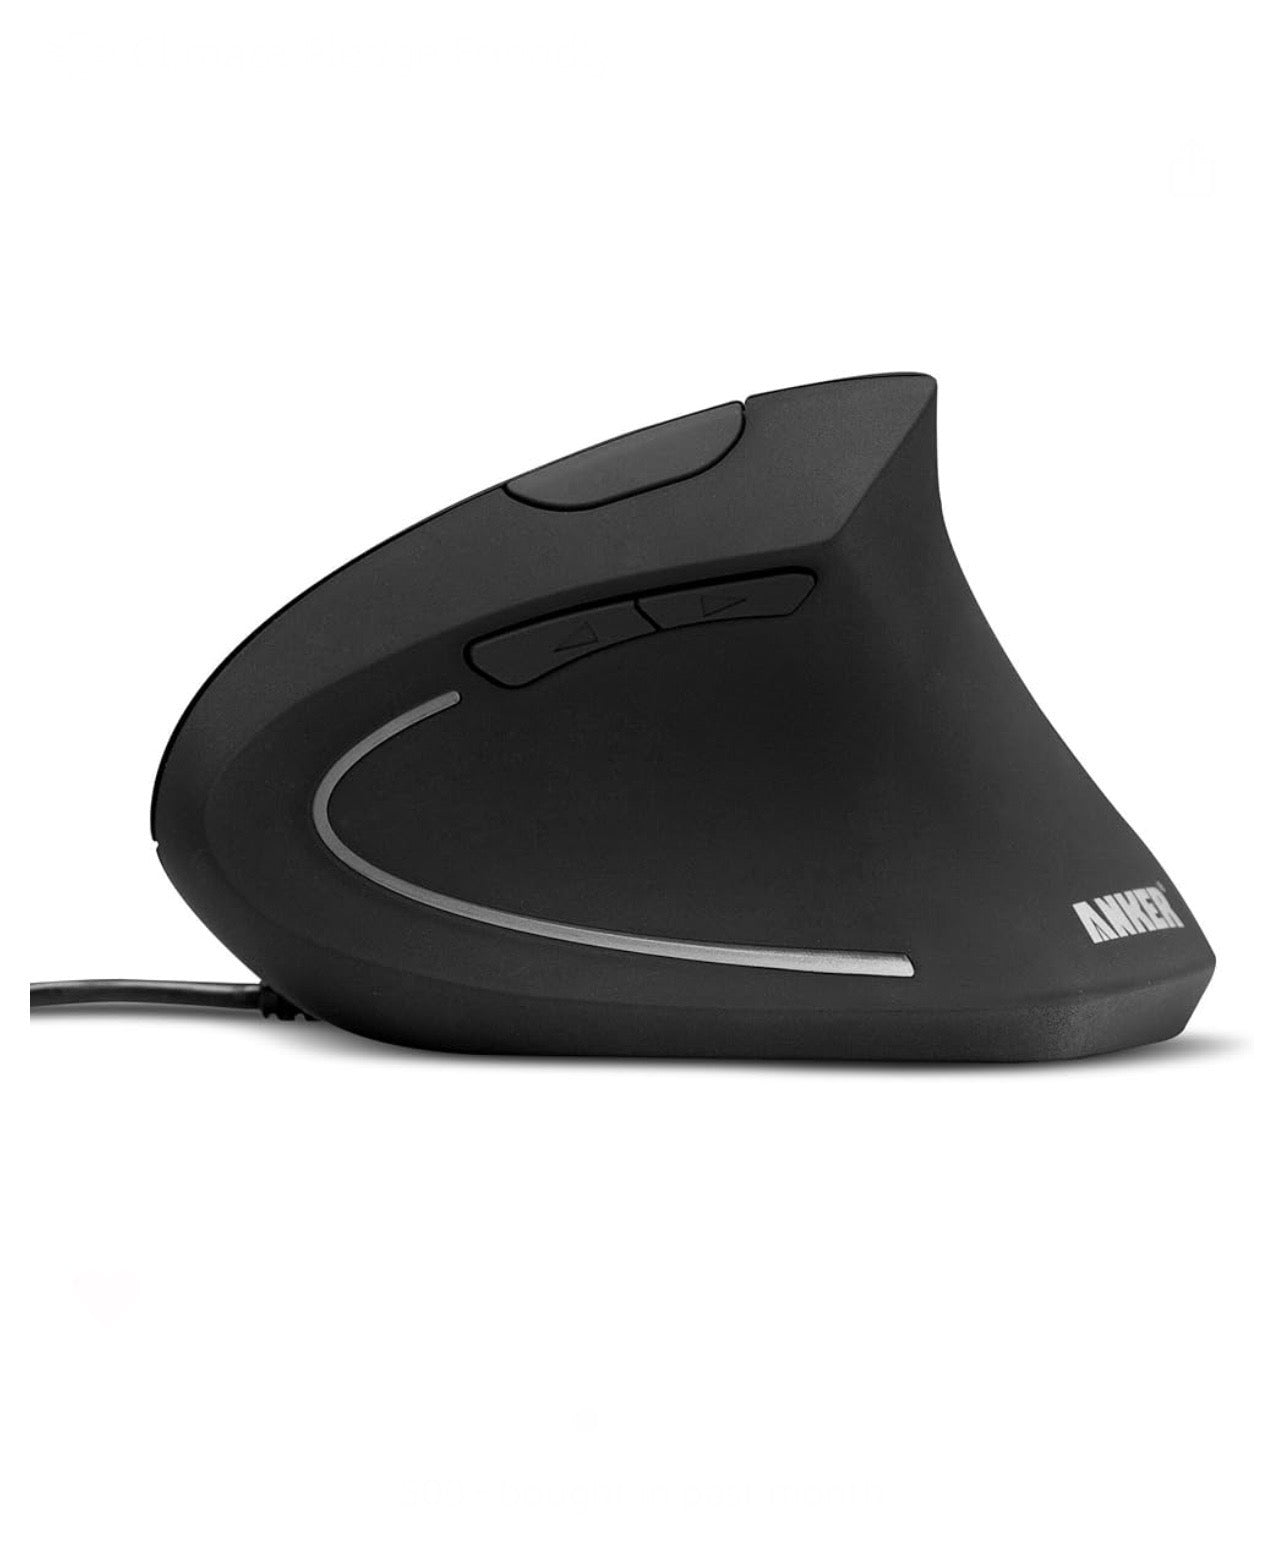 Anker® Ergonomic Optical USB Wired Vertical Mouse 1000 / 1600 DPI, 5 Buttons